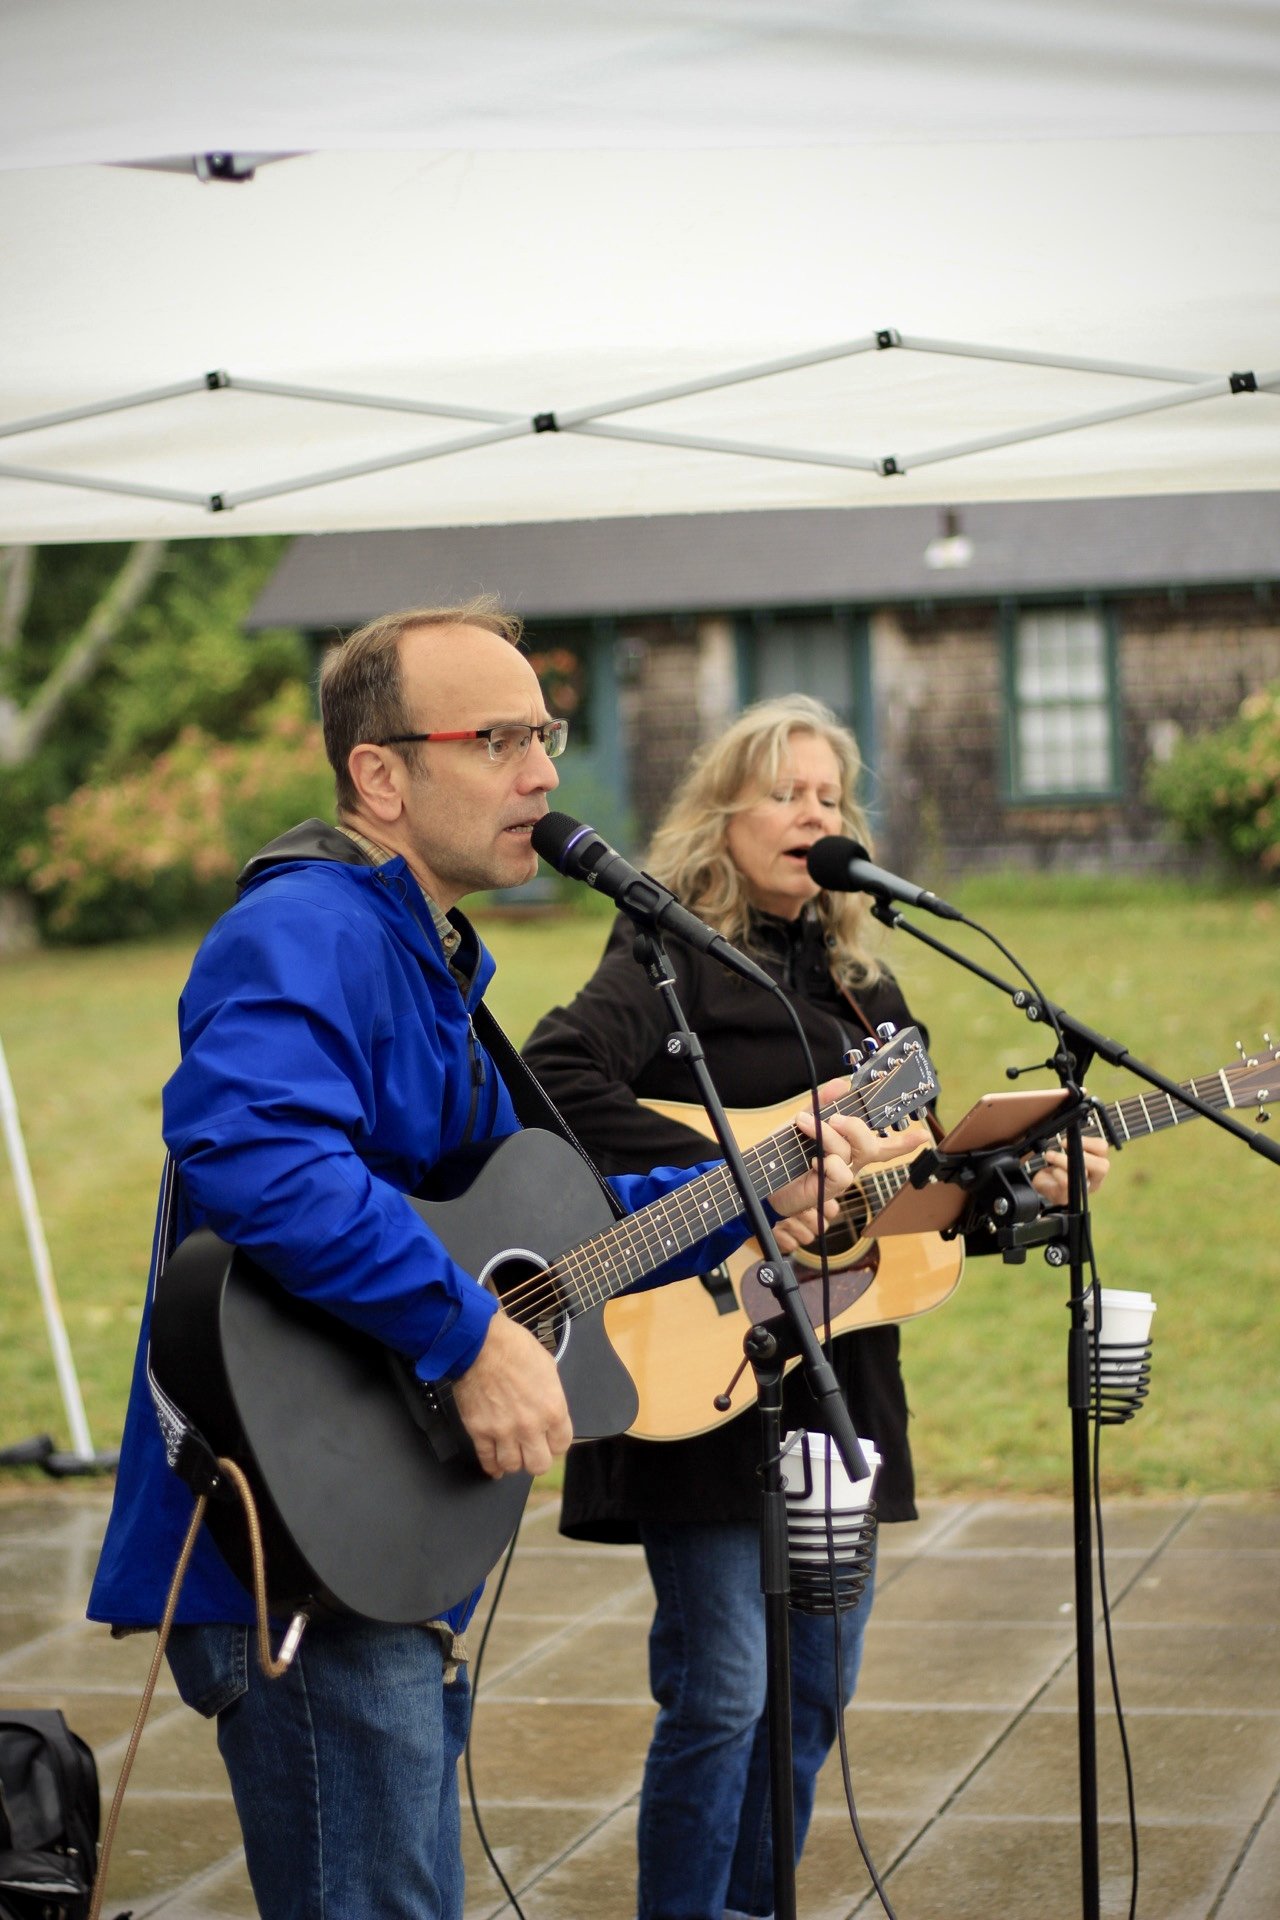 The Louise Adams Acoustic Duo performs.